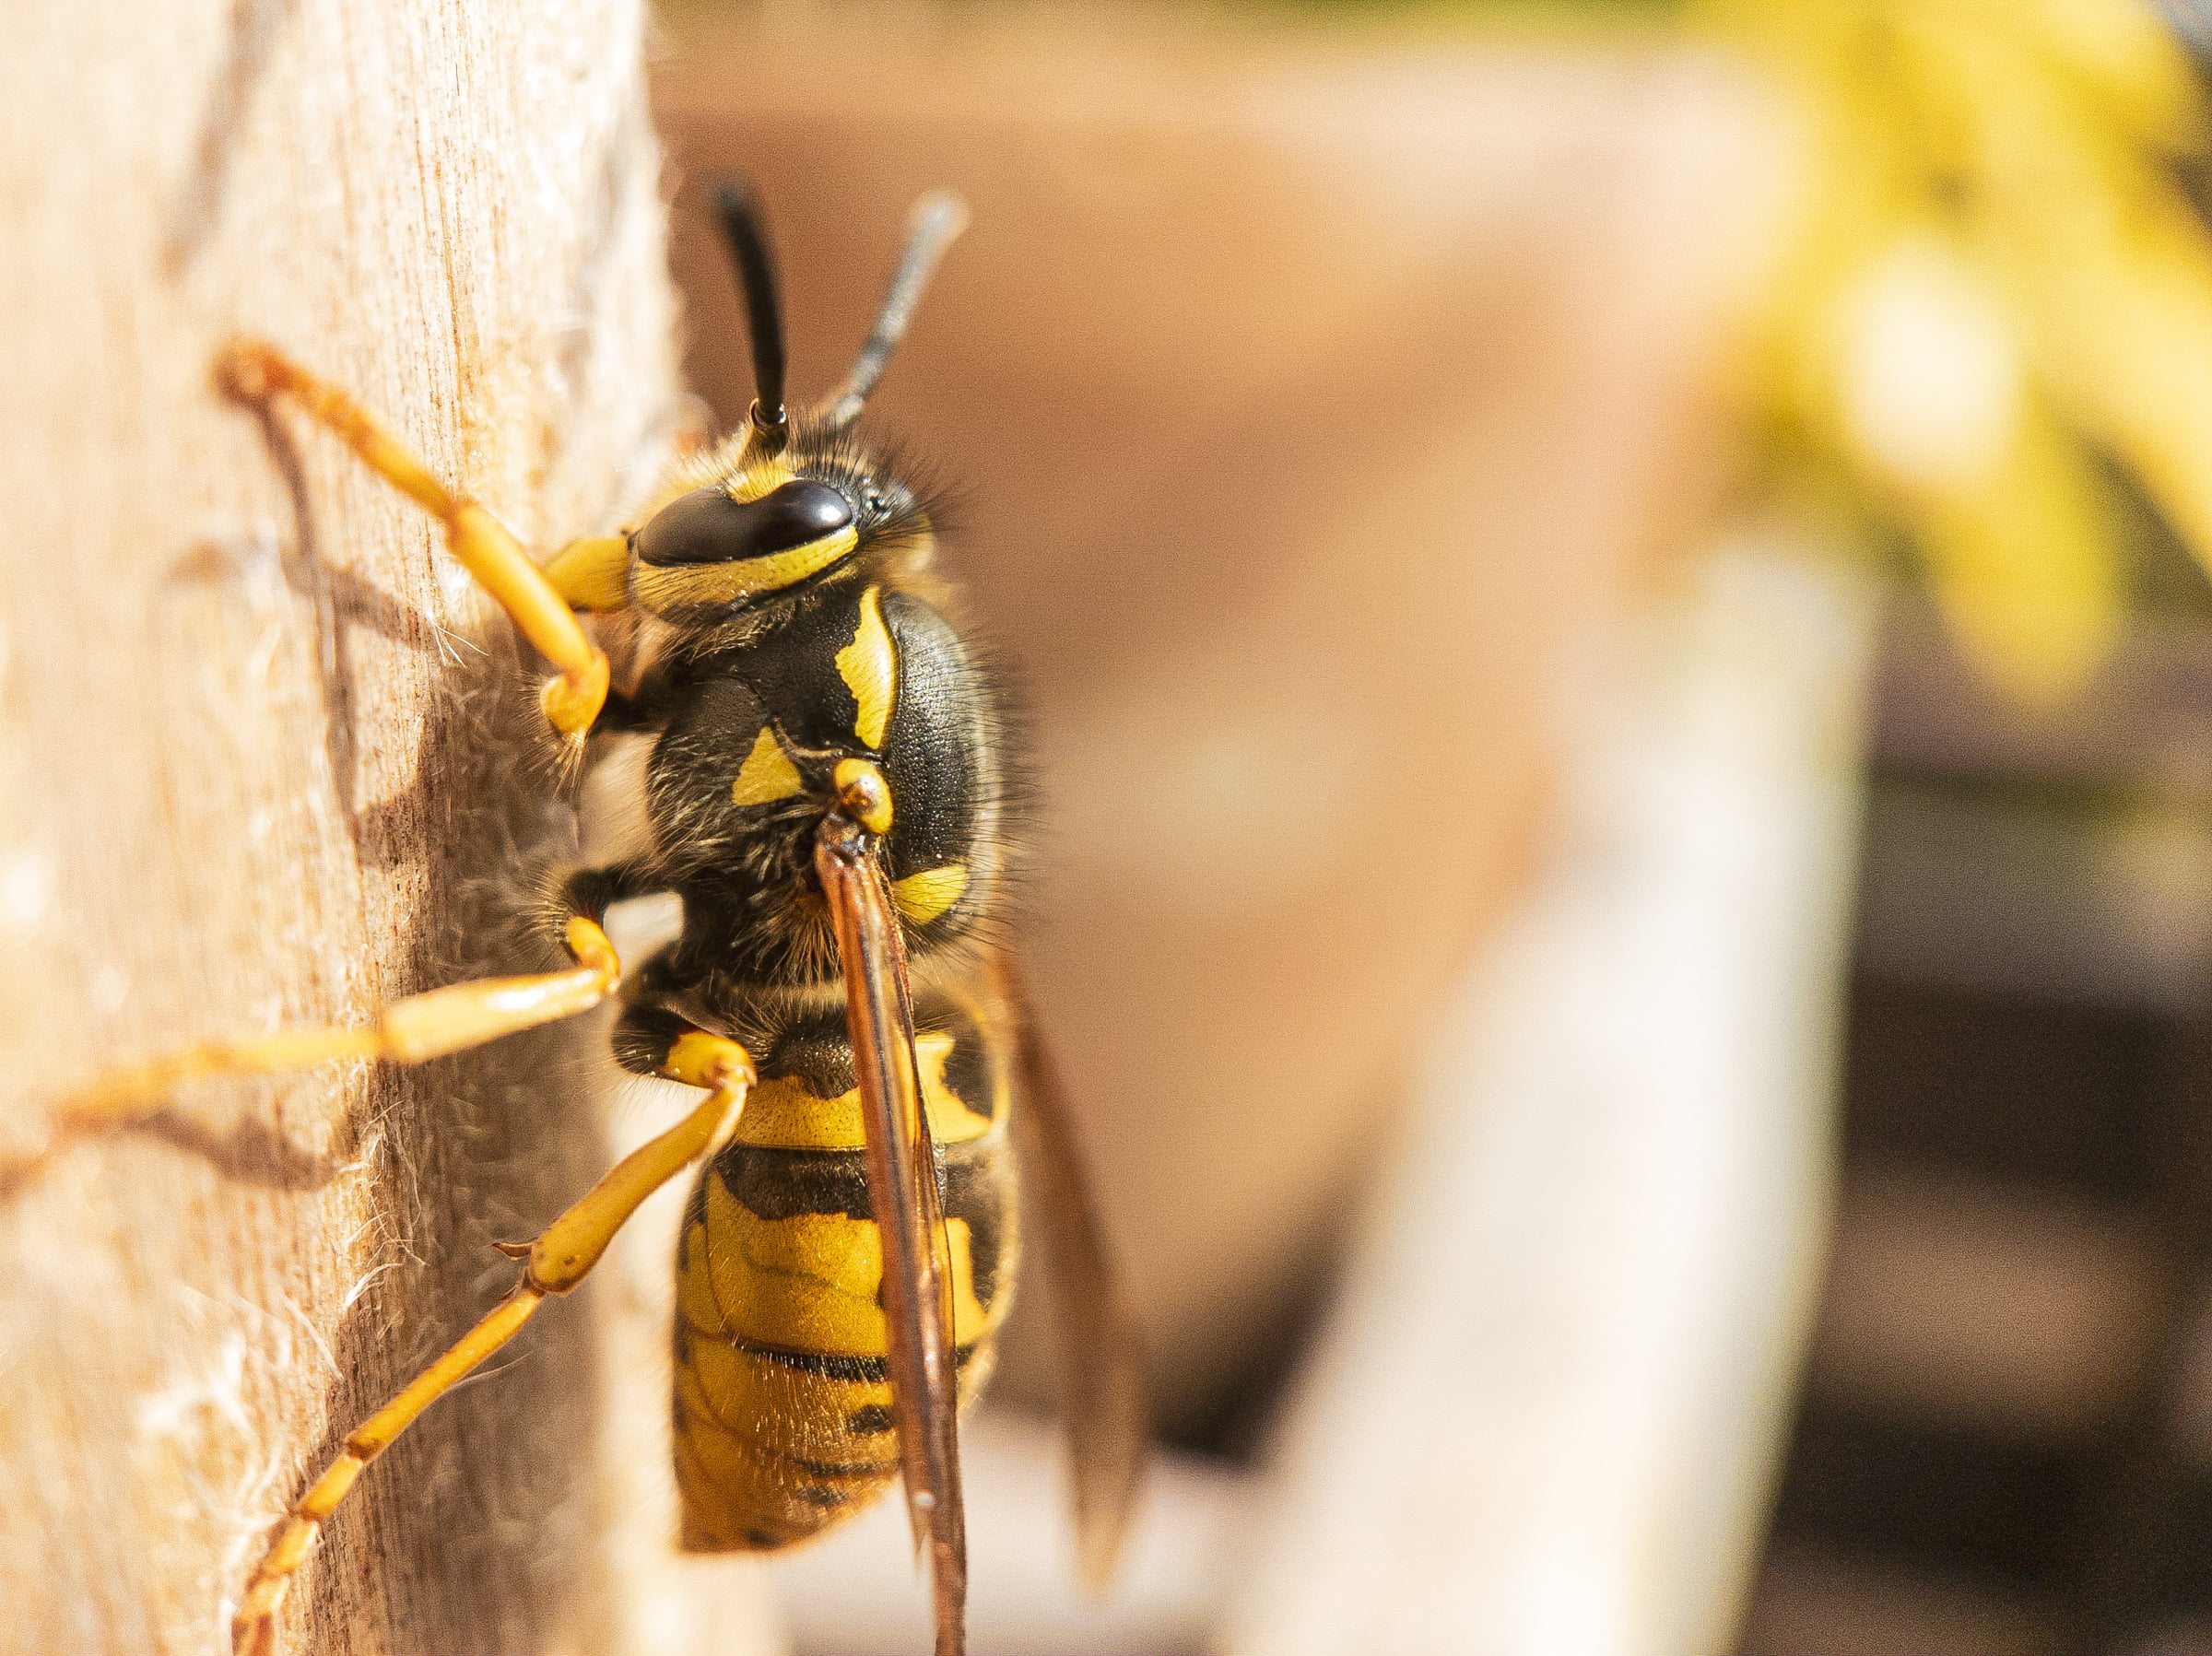 A macro shot of a wasp clinging vertically to a board.